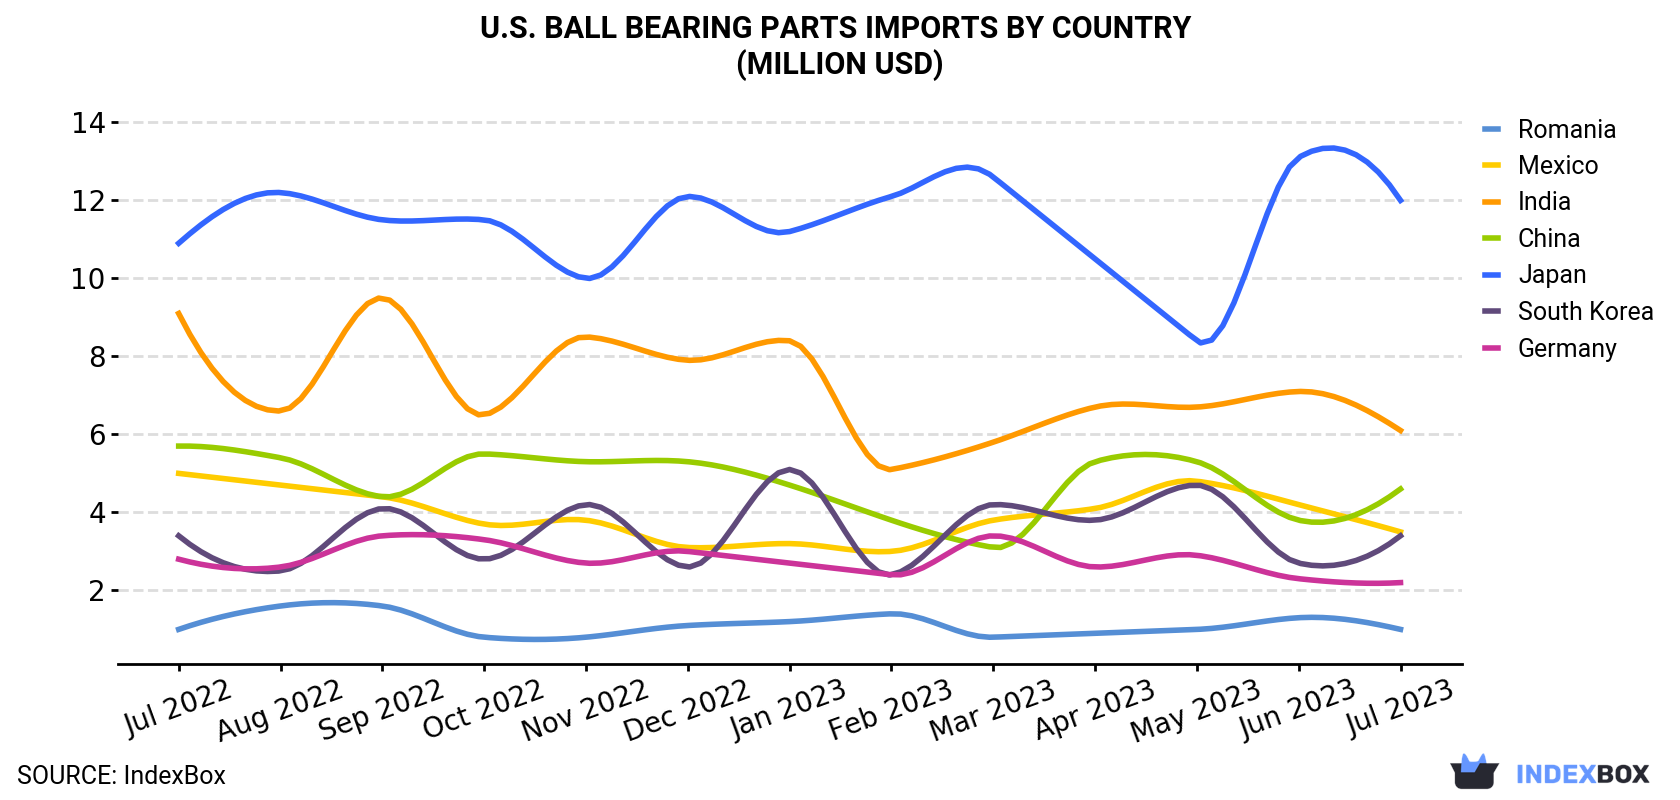 U.S. Ball Bearing Parts Imports By Country (Million USD)